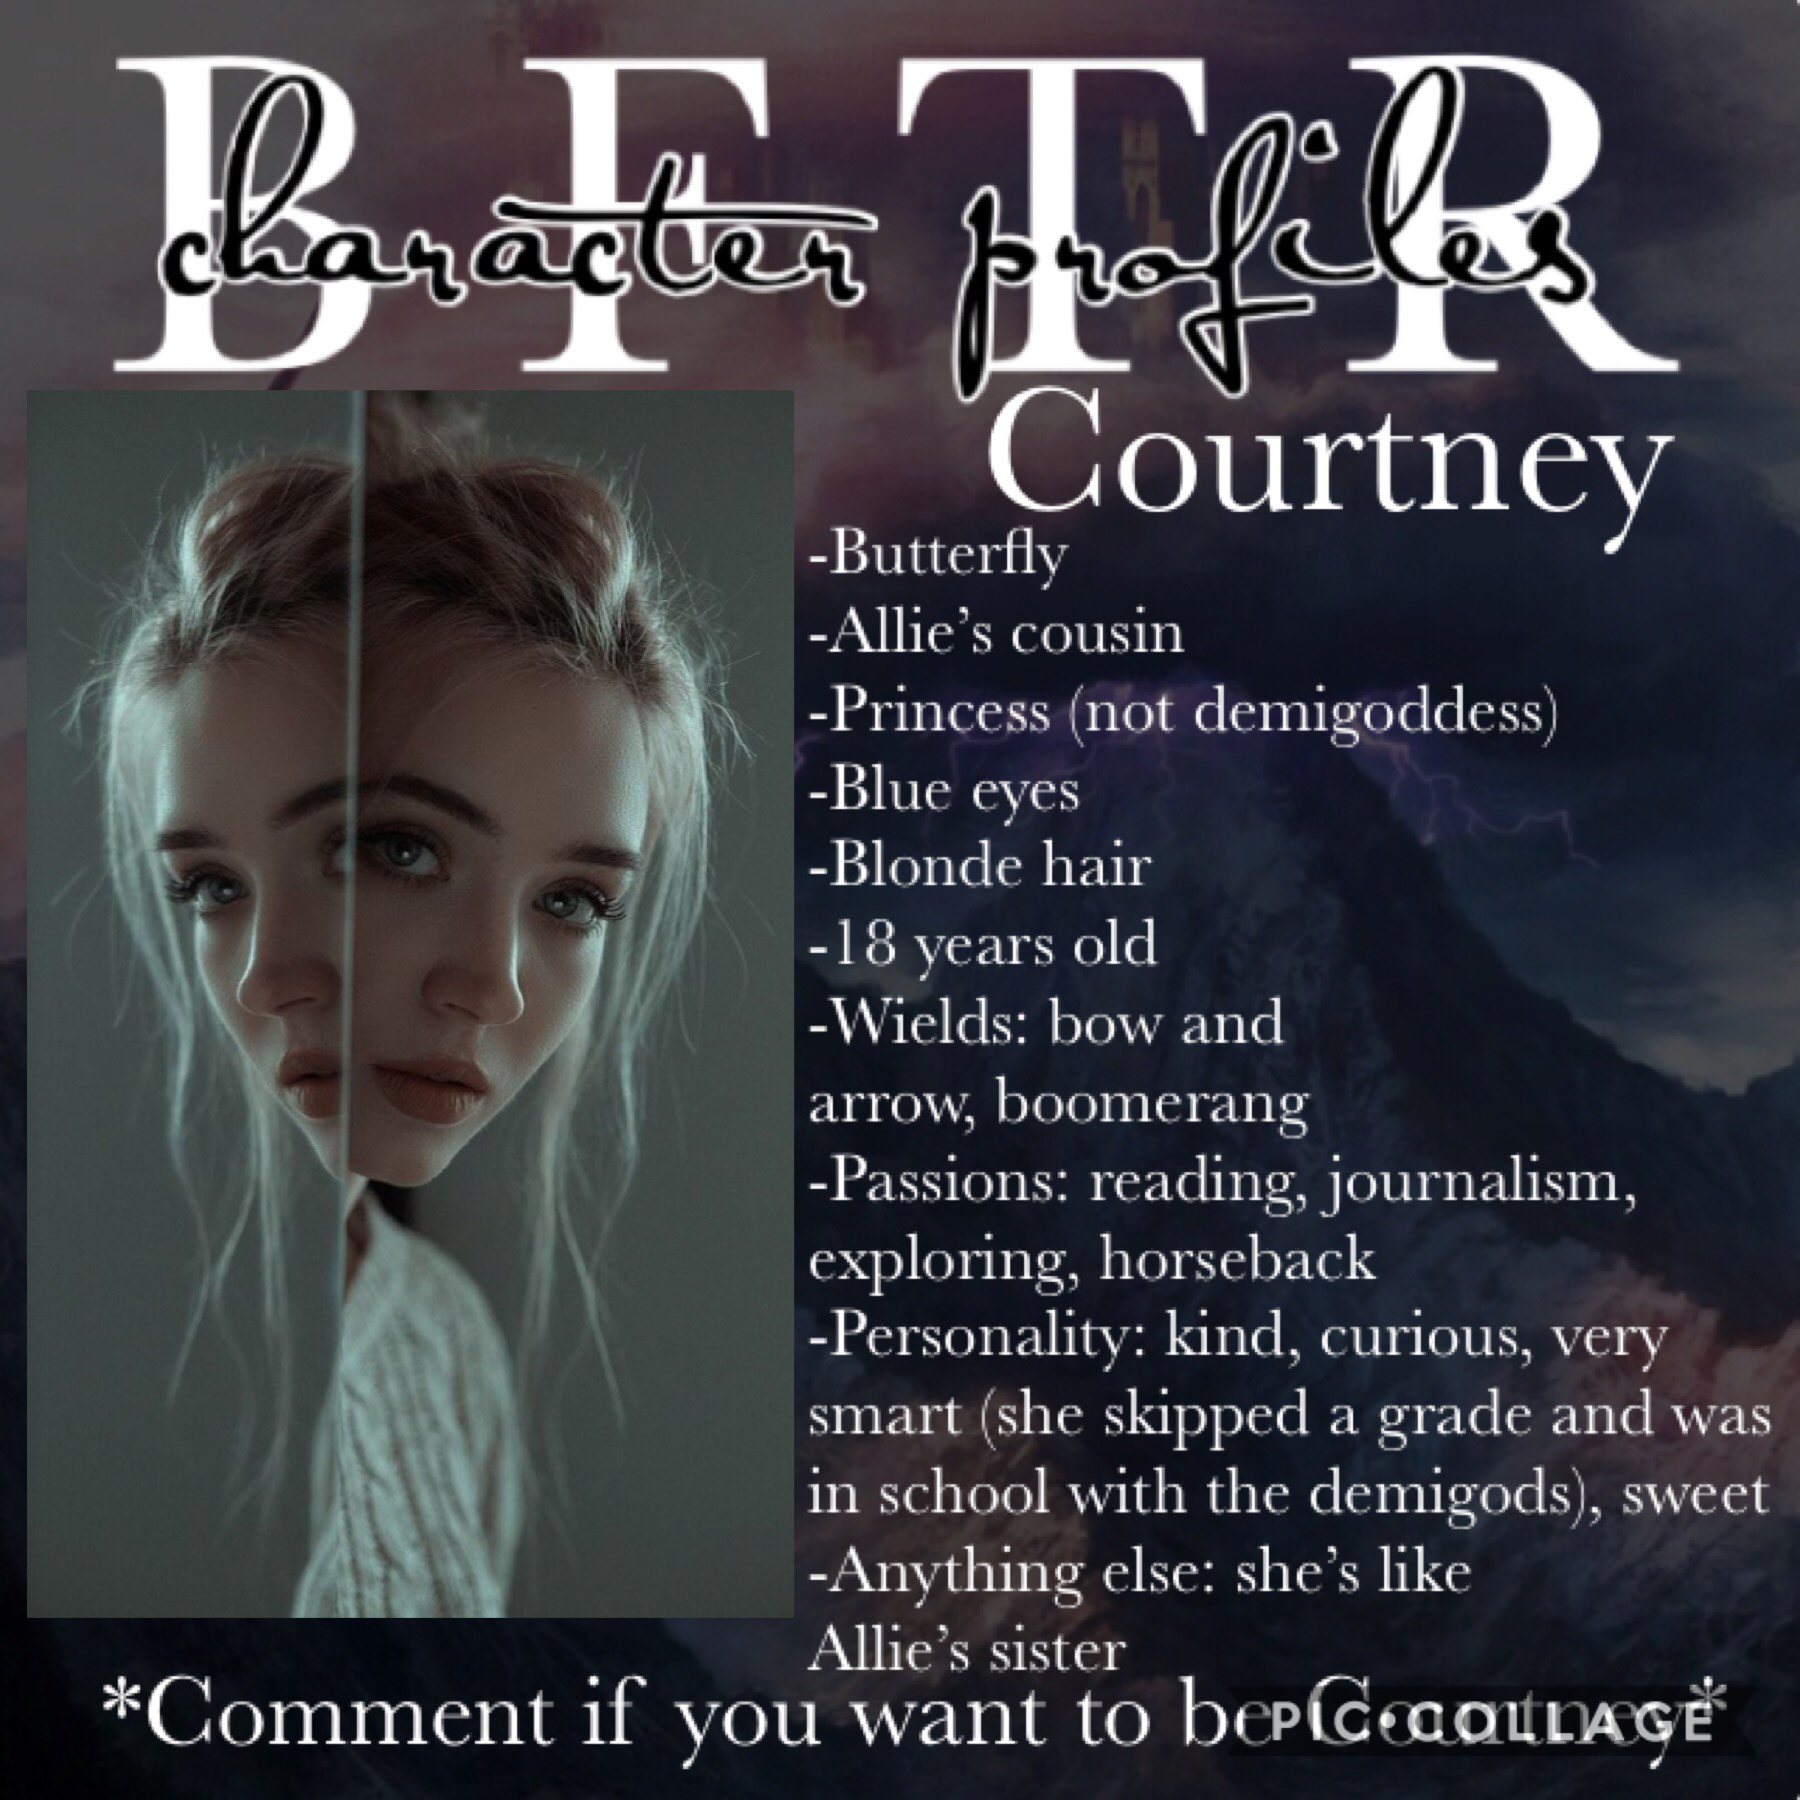 🖤COMMENT TO PLAY COURTNEY🖤